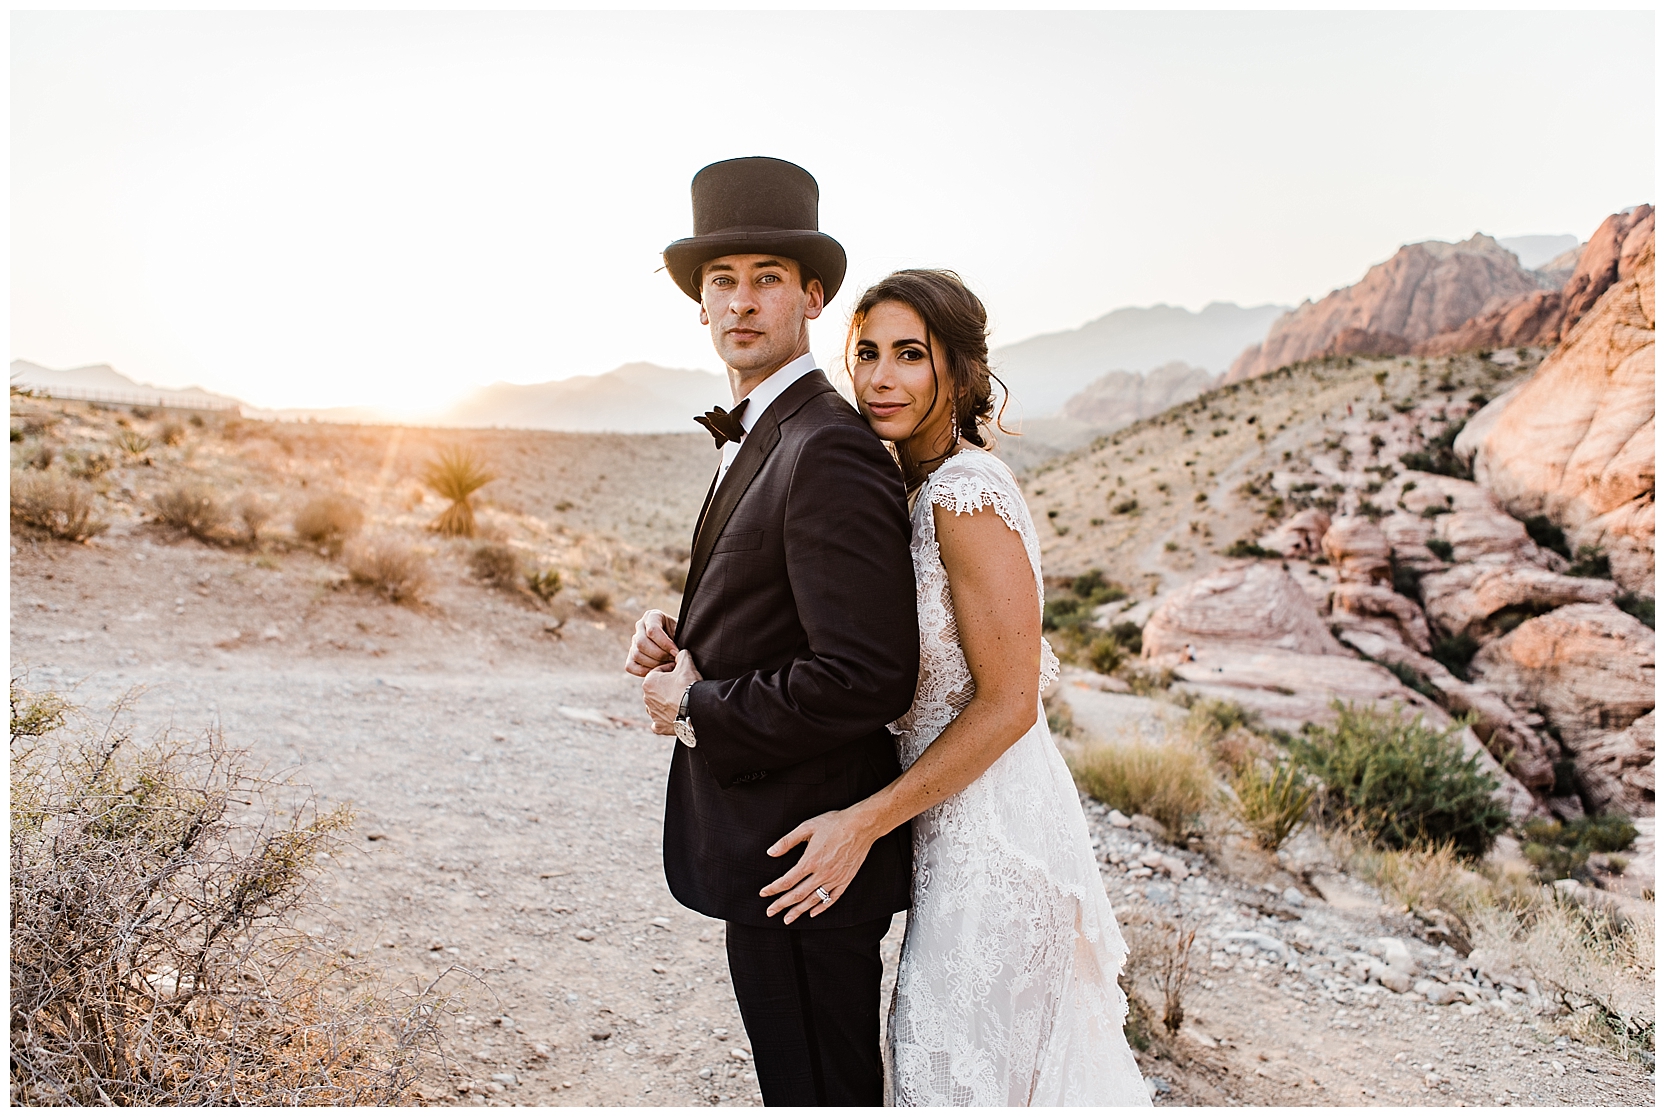 Red Rock Canyon Elopement photo by Lindsey Ramdin, L.A.R. Weddings